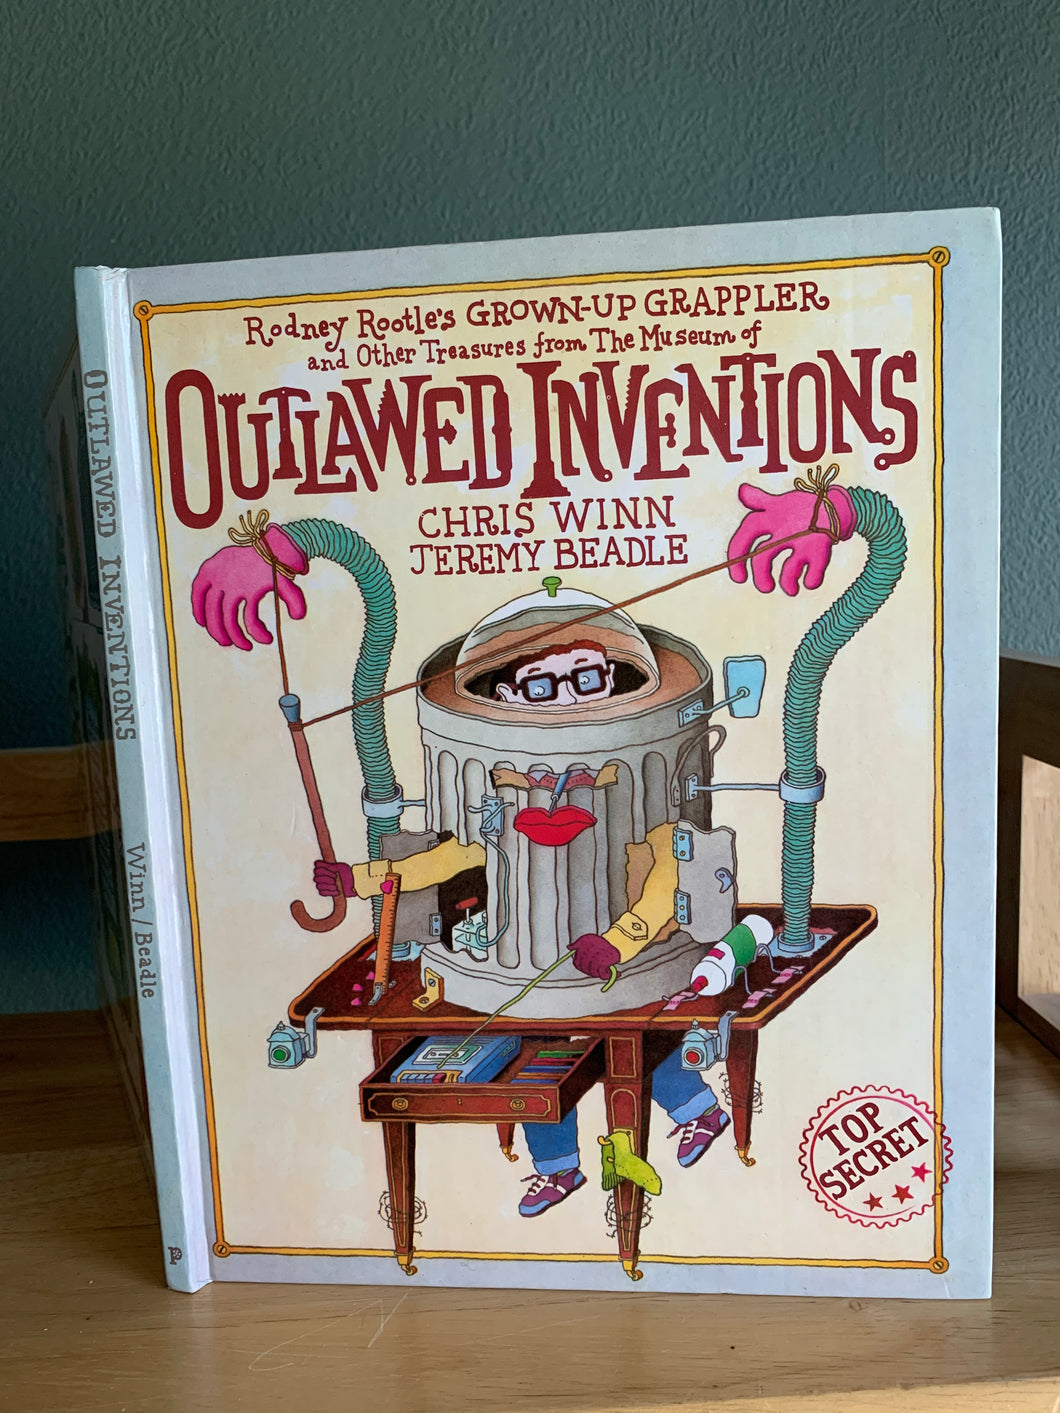 Rodney Rootle’s Grown-up Grappler and Other Treasures from the Museum of Outlawed Inventions'